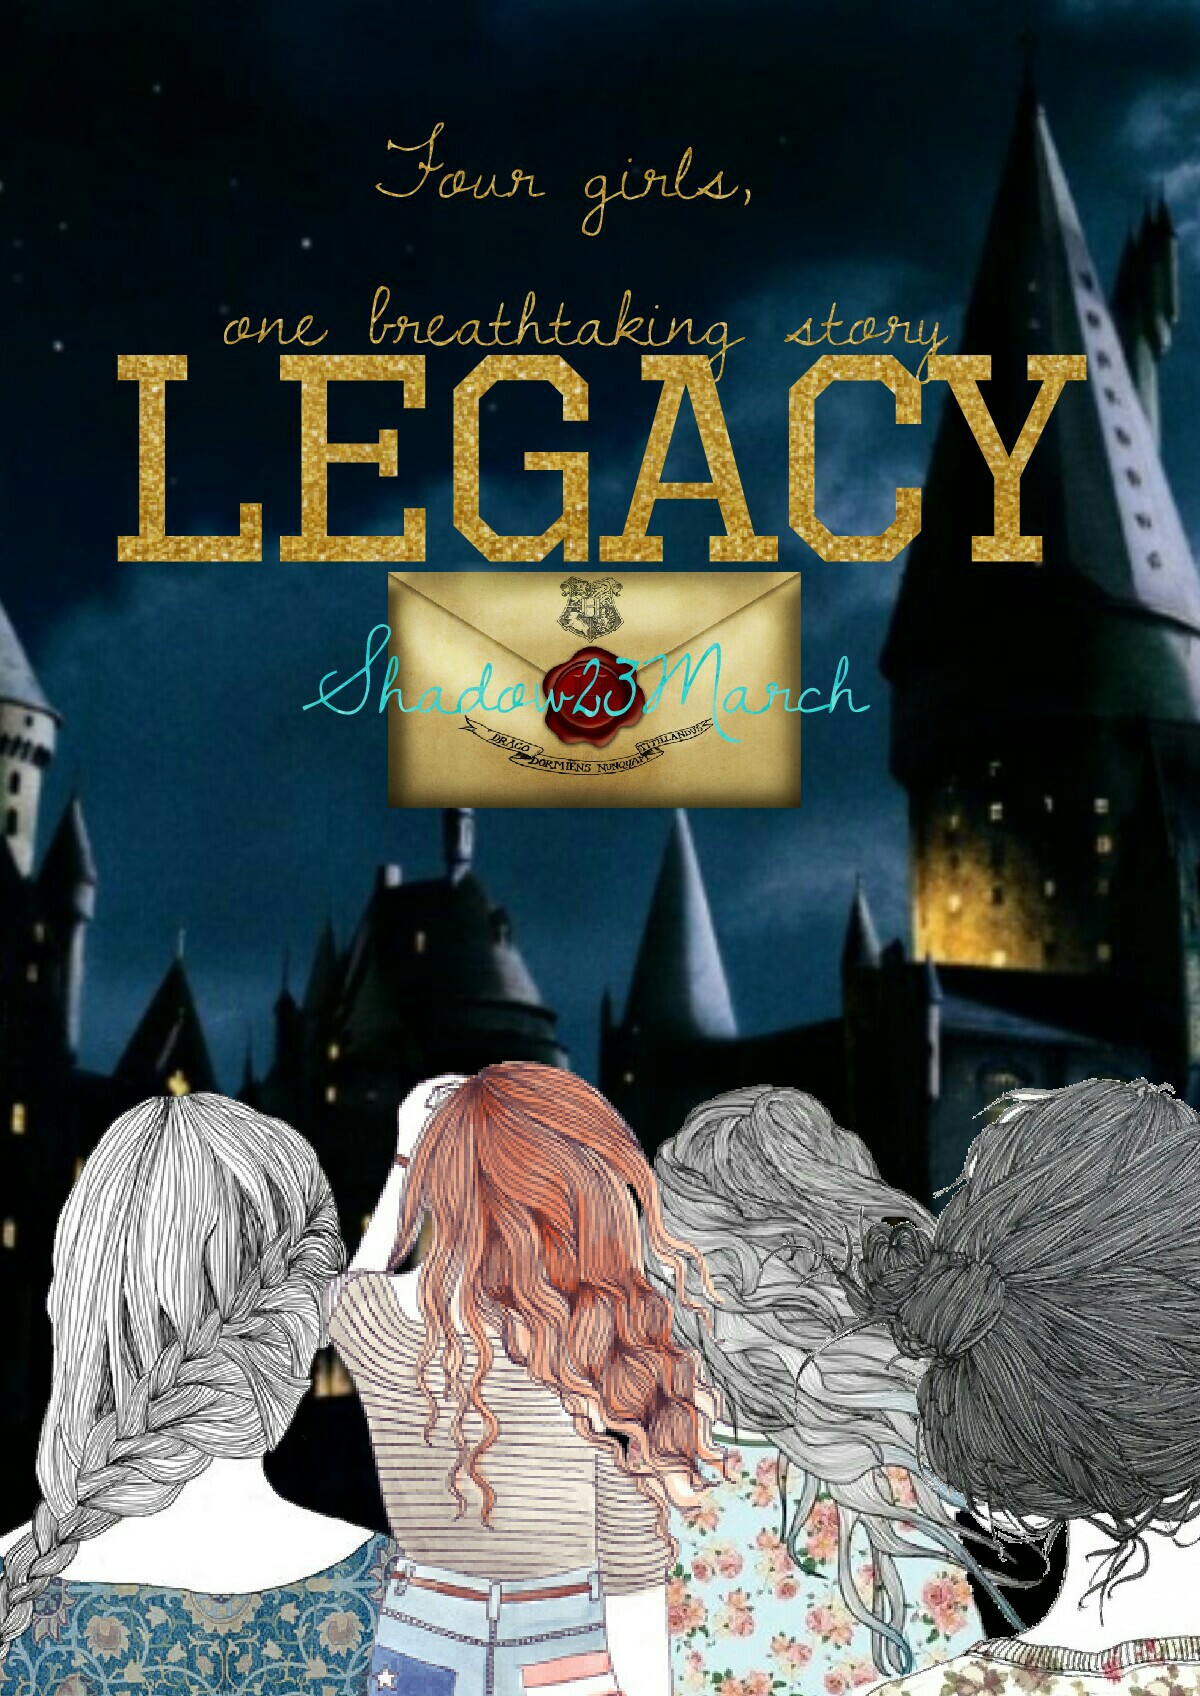 Check out my Harry Potter Mauraders Daughters Fanfiction on Wattpad.com! Follow me there at Shadow23march! This is the new cover!